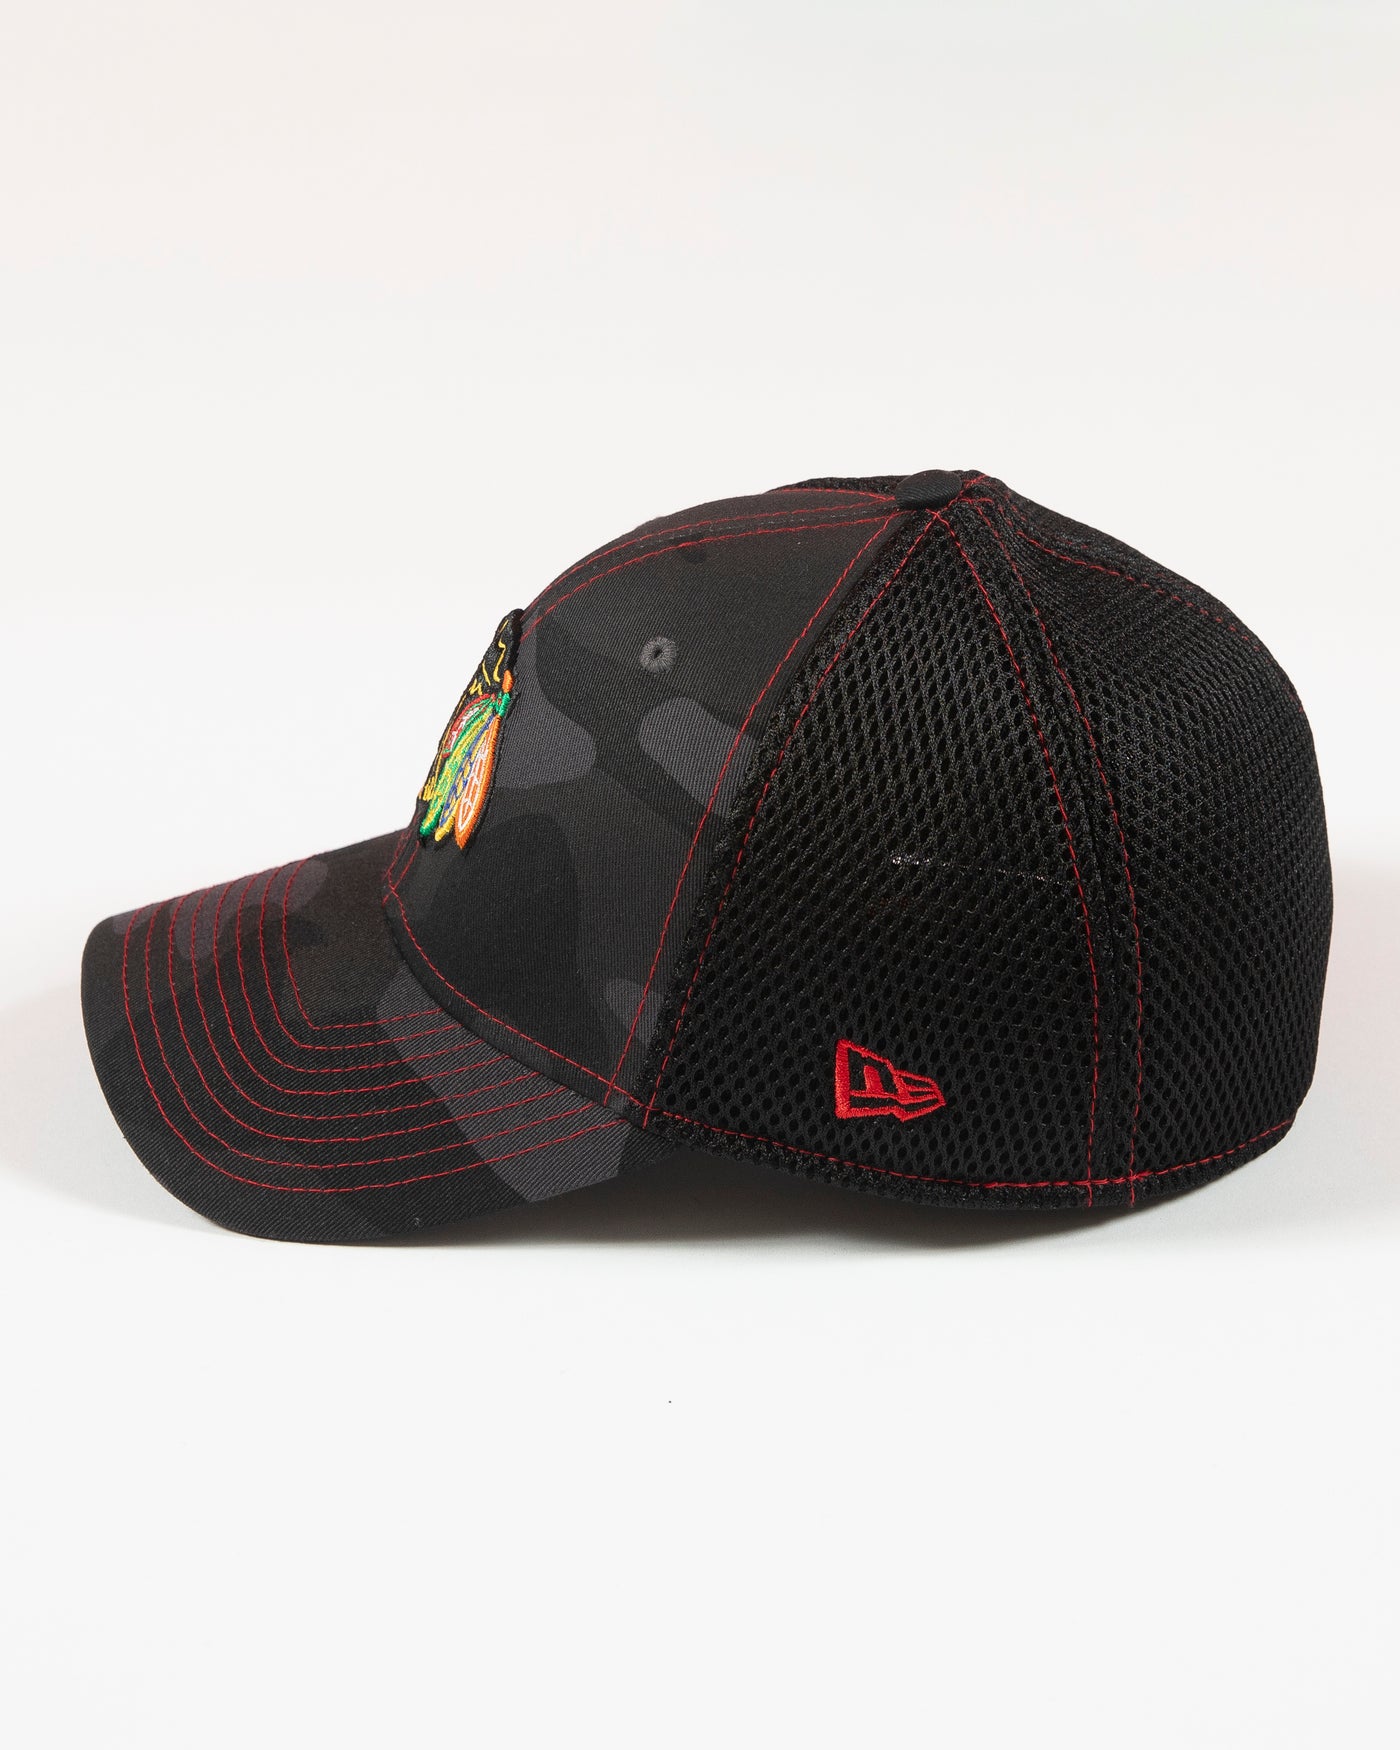 black camo New Era fitted cap with Chicago Blackhawks primary logo embroidered on front - left side lay flat